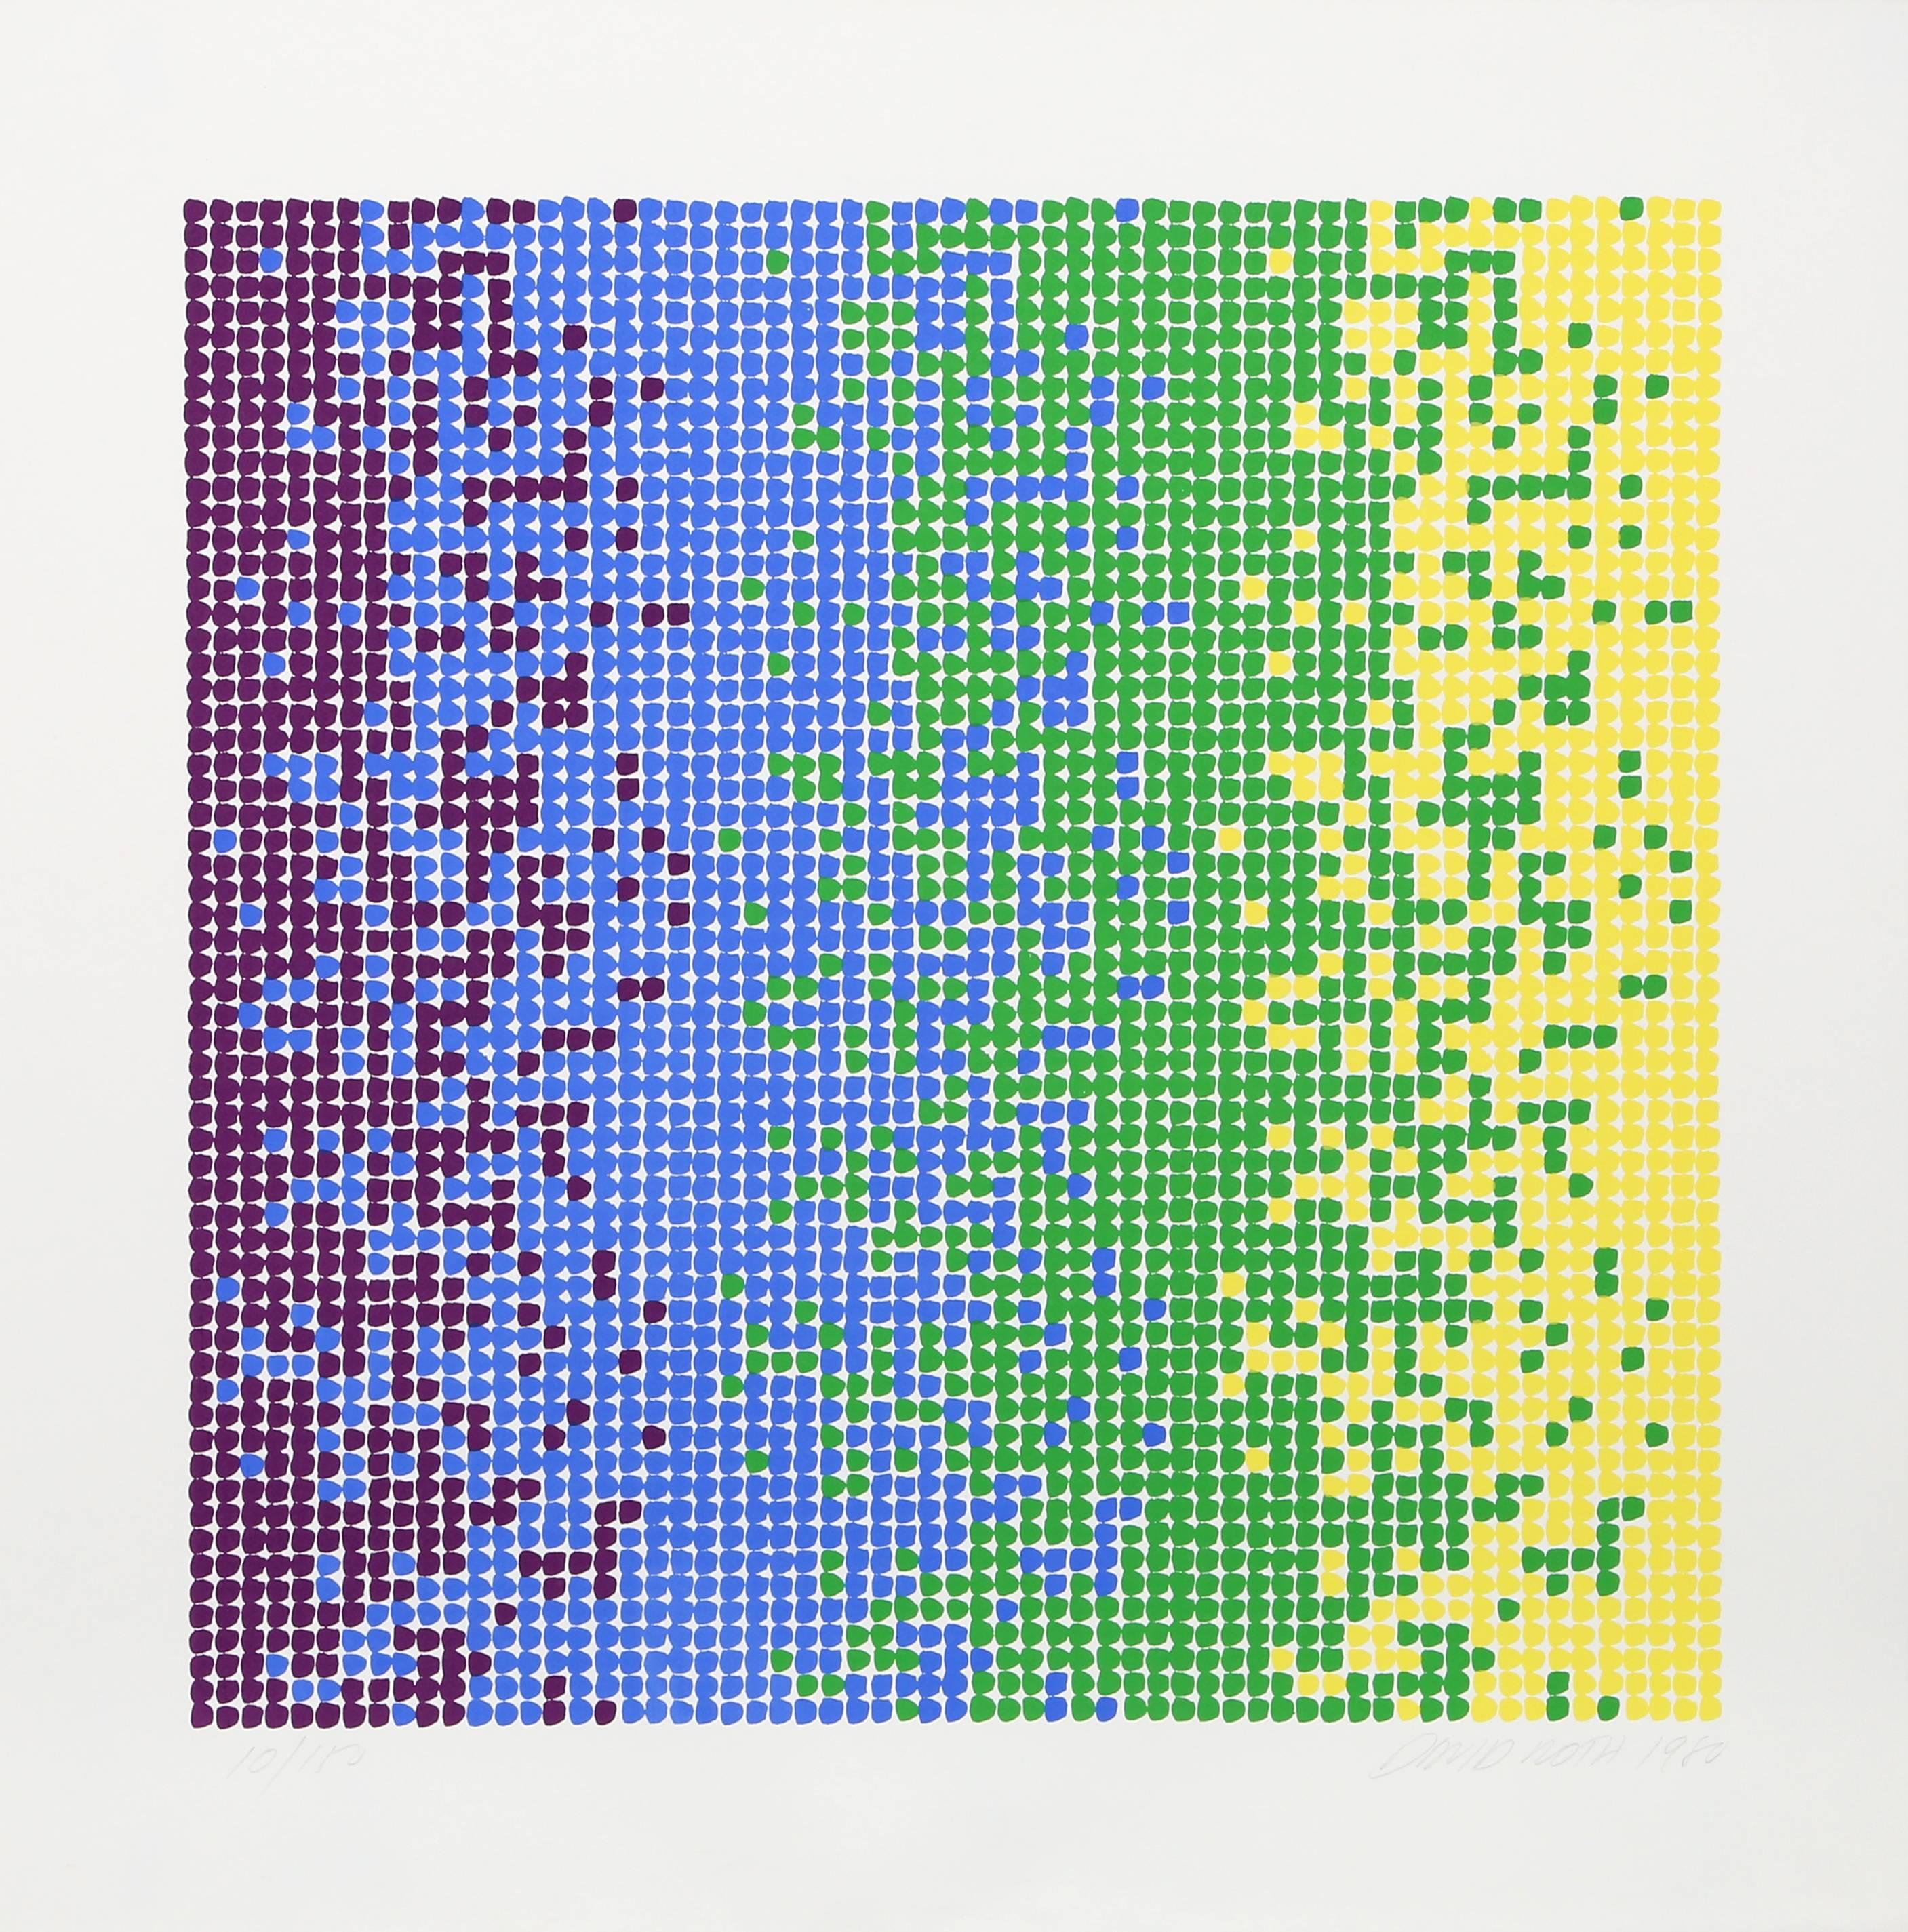 Artist: David Roth, American (1942 - )
Title: Untitled 3
Year: 1980
Medium: Serigraph, signed and numbered in pencil
Edition: 150
Image Size: 23 x 23 inches
Size: 29 in. x 29 in. (73.66 cm x 73.66 cm)